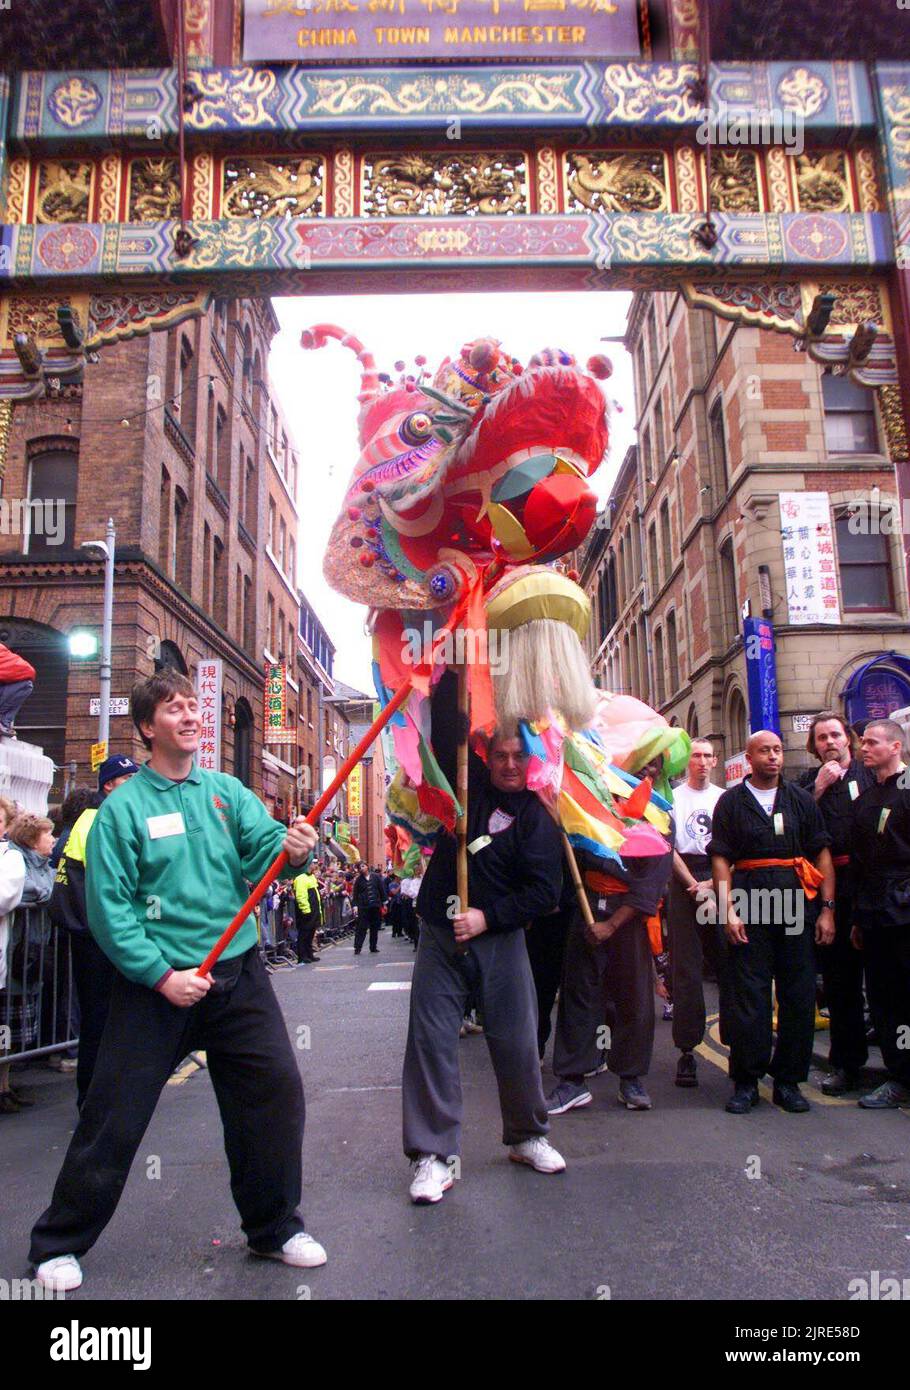 CHINESE DRAGON UNDER ARCH .CHINA TOWN MANCHESTER. PICTURE GARY ROBERTS. Stock Photo